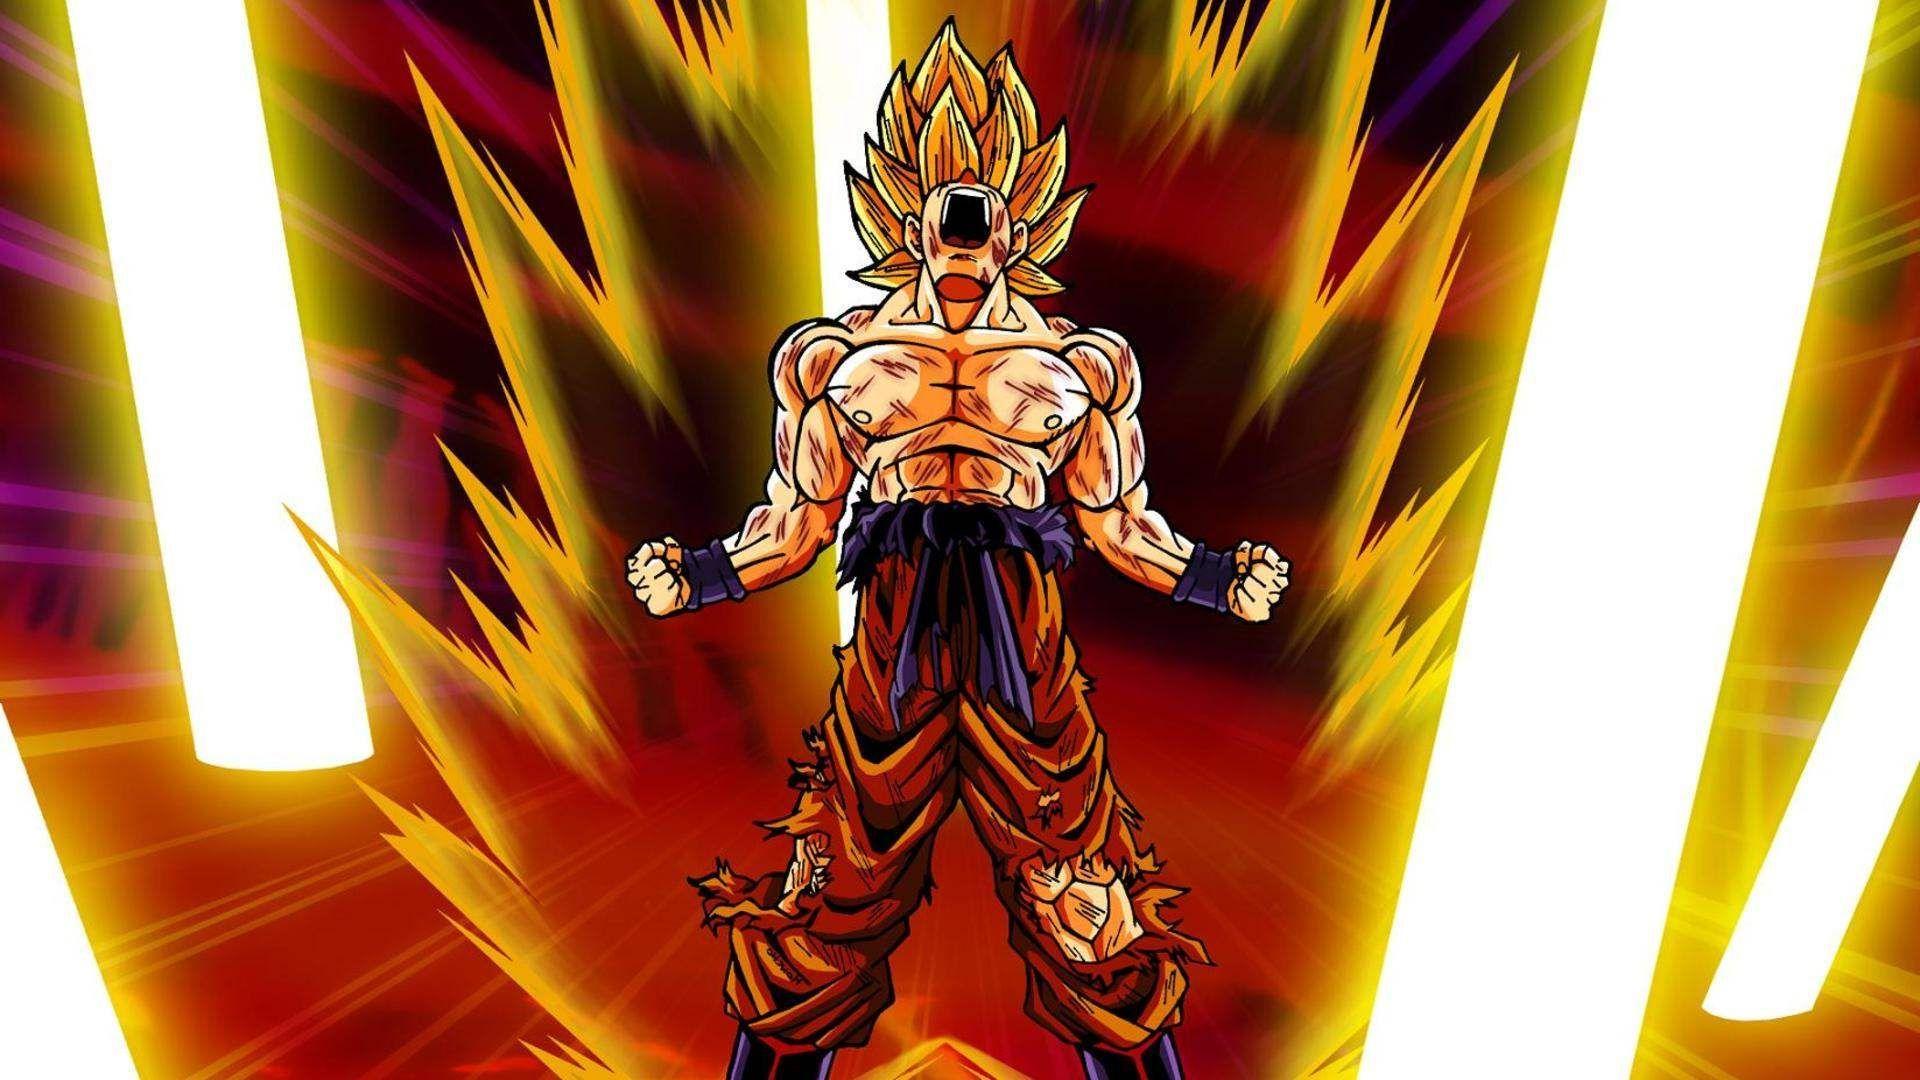 Dragon Ball Z HD Wallpapers and Backgrounds 1024×768 Dragon Ball Z